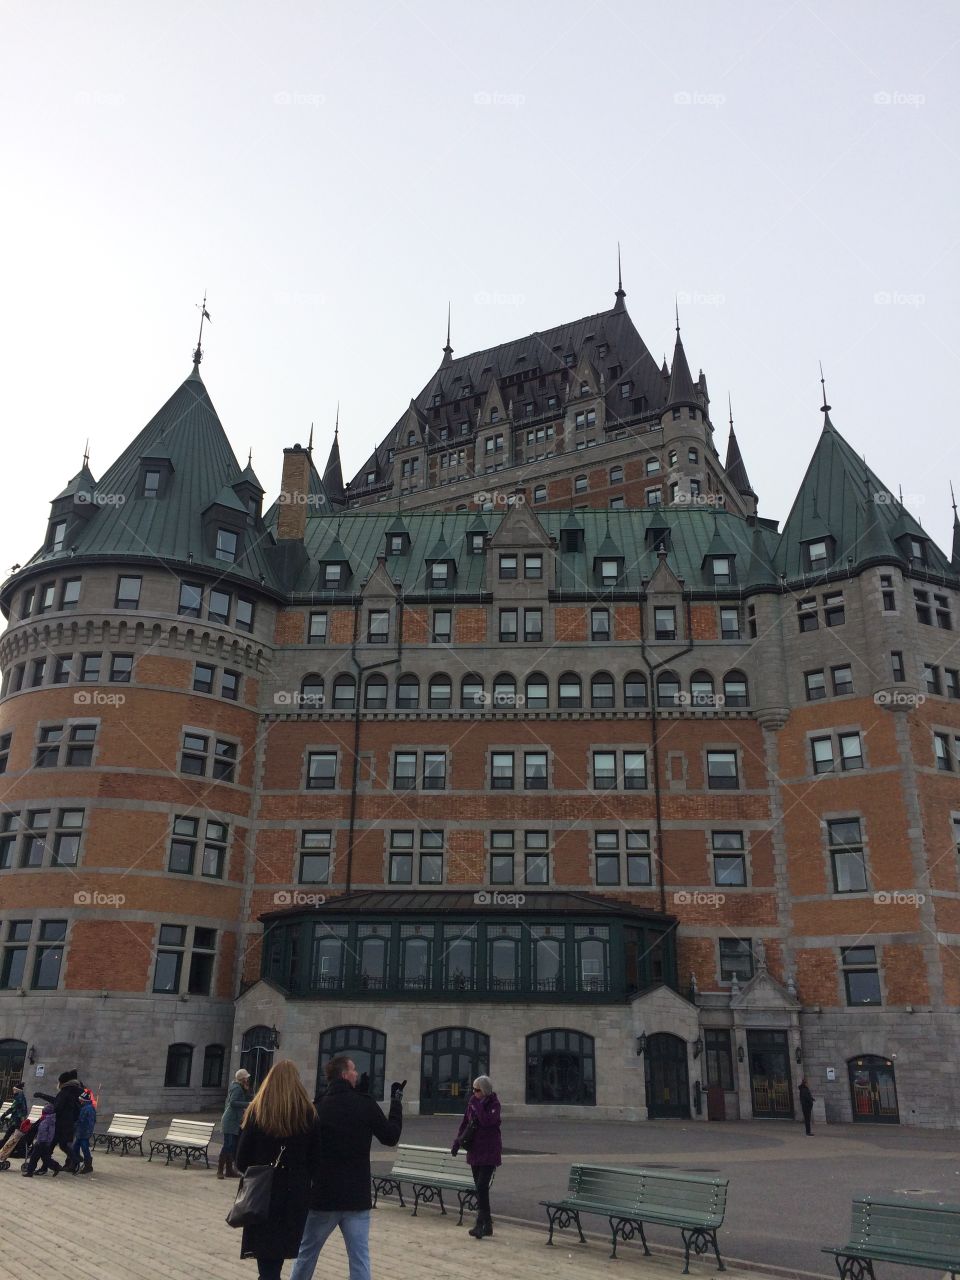 Hotel in Old Town Quebec 